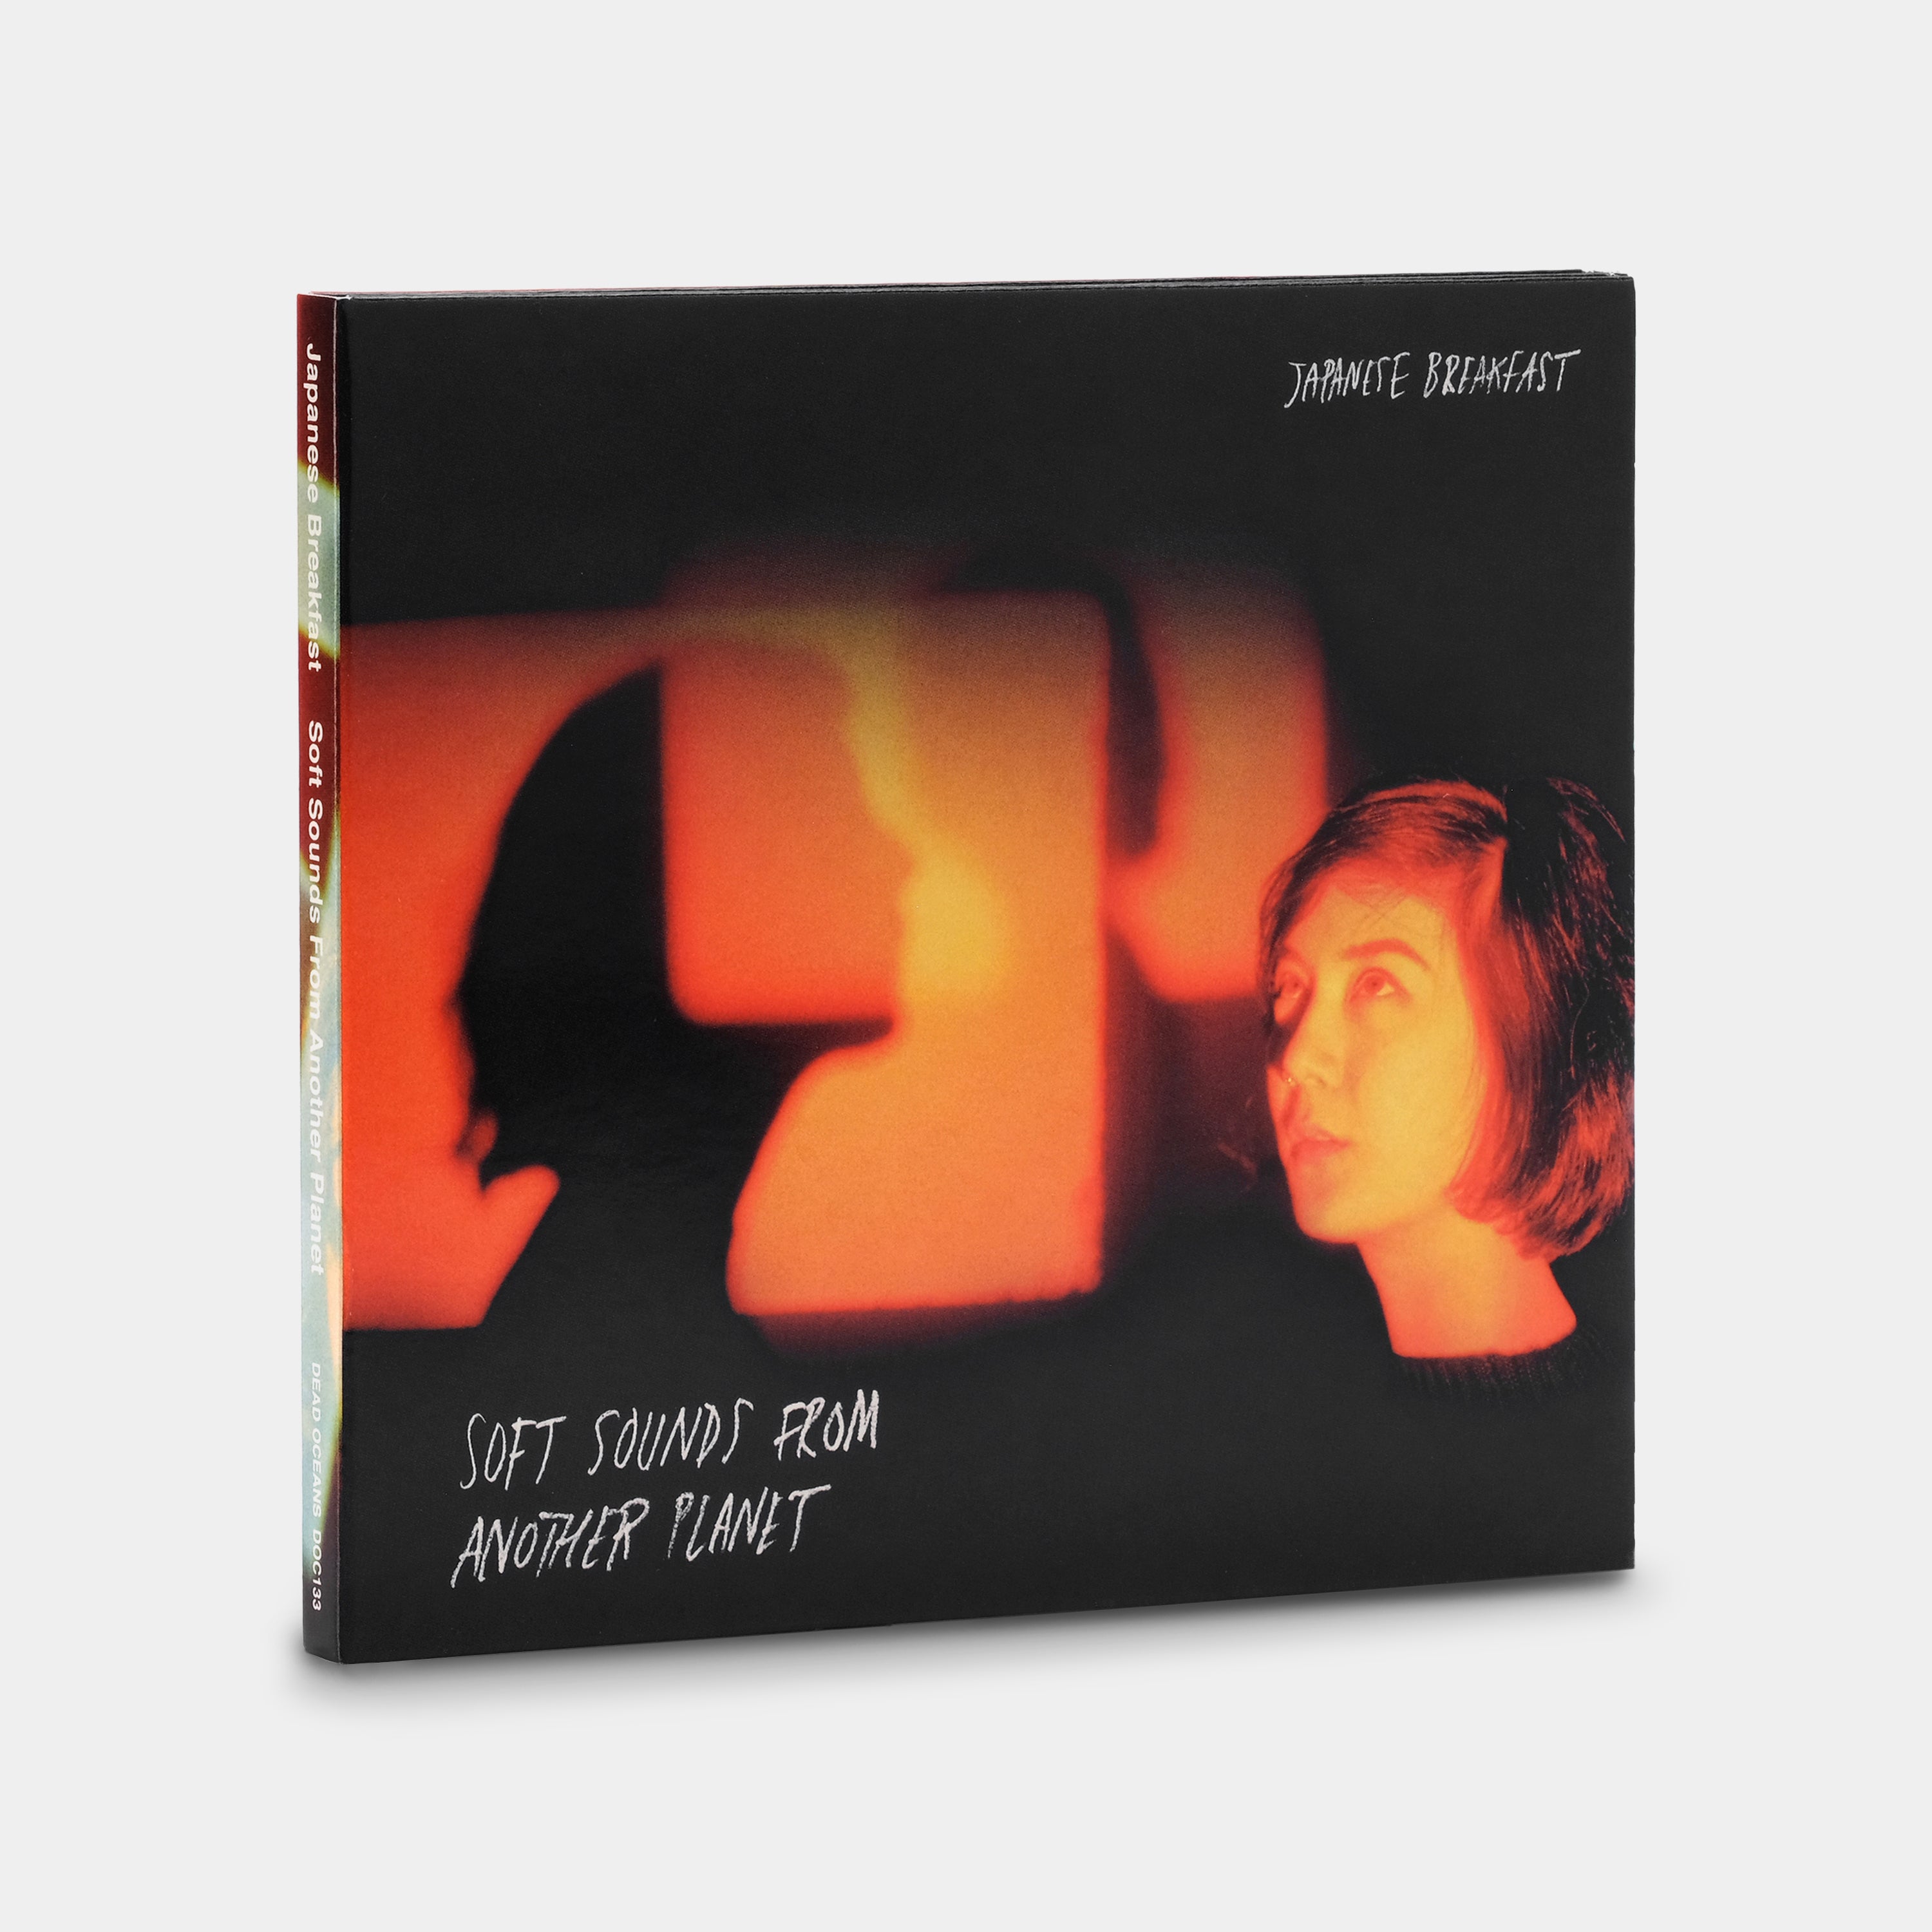 Japanese Breakfast - Soft Sounds From Another Planet CD